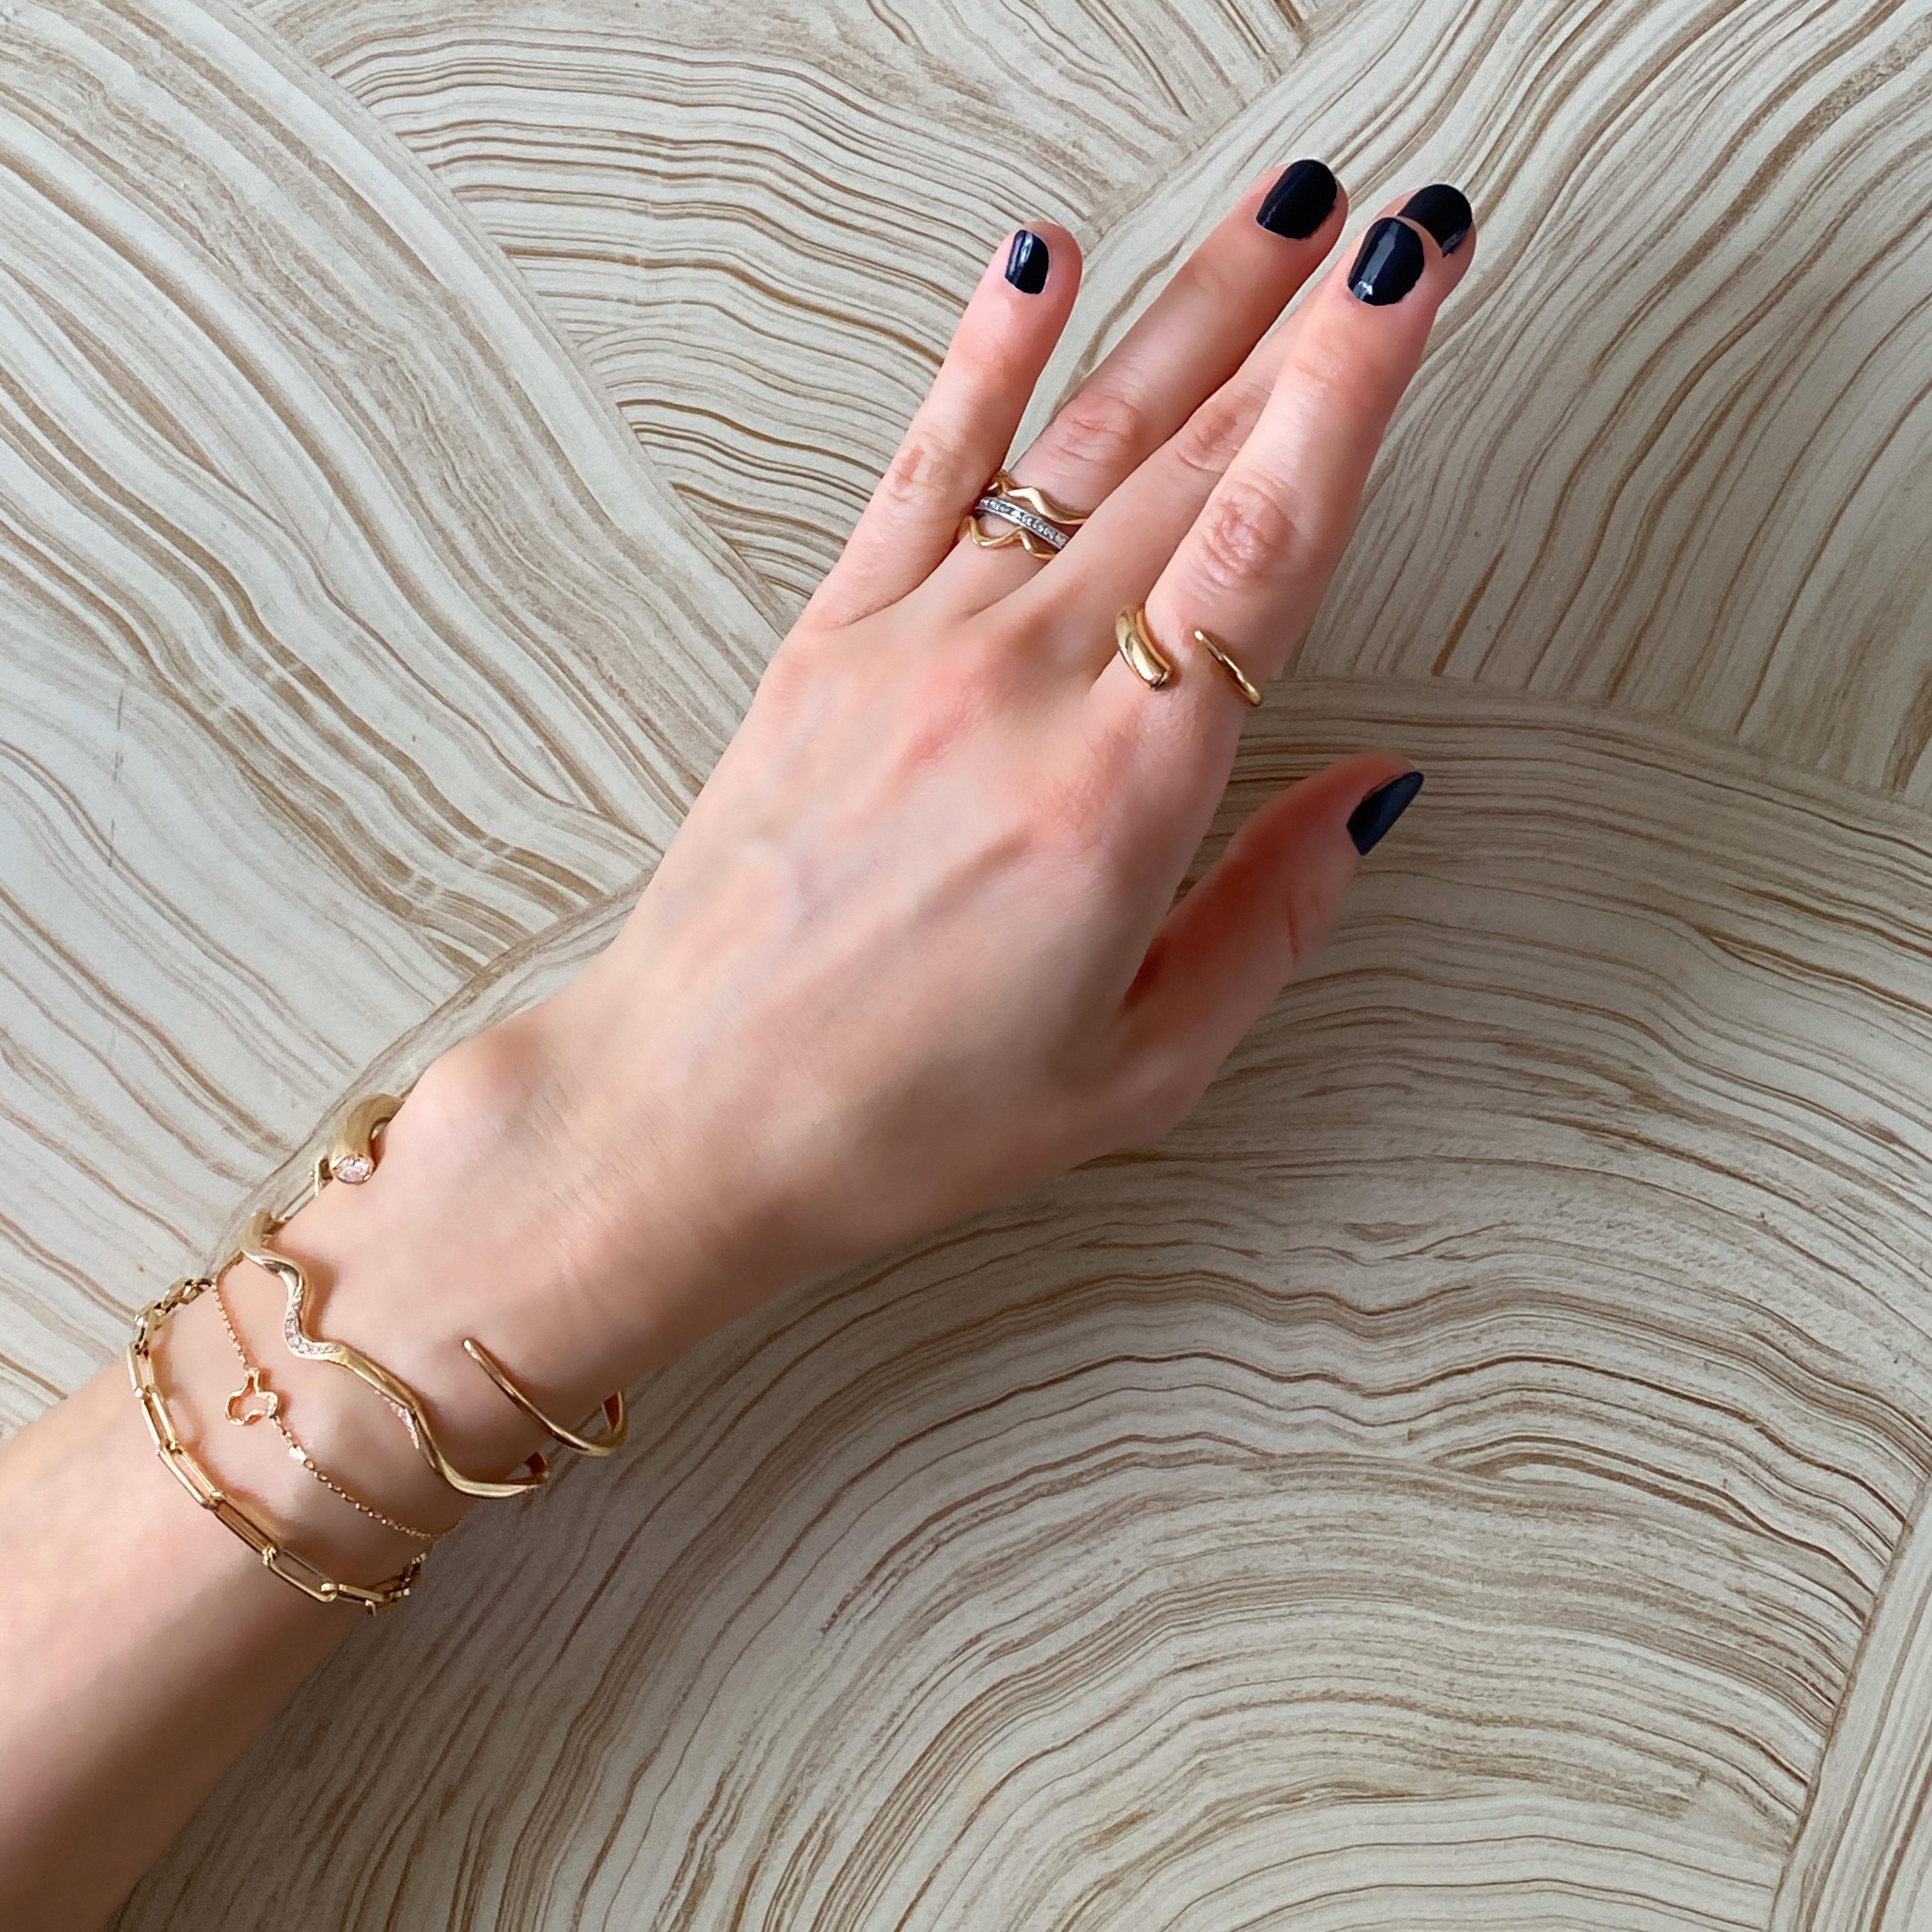 - 14k recycled yellow gold
- Ripple length: 9mm
- Bracelet length: 7 inches (adjustable up to -2”)
- Ethical diamonds
- Total carat weight: 0.04 carat
- Made in NYC

Wear our 'Ripples' as a reminder of your feminine strength and power. We love this